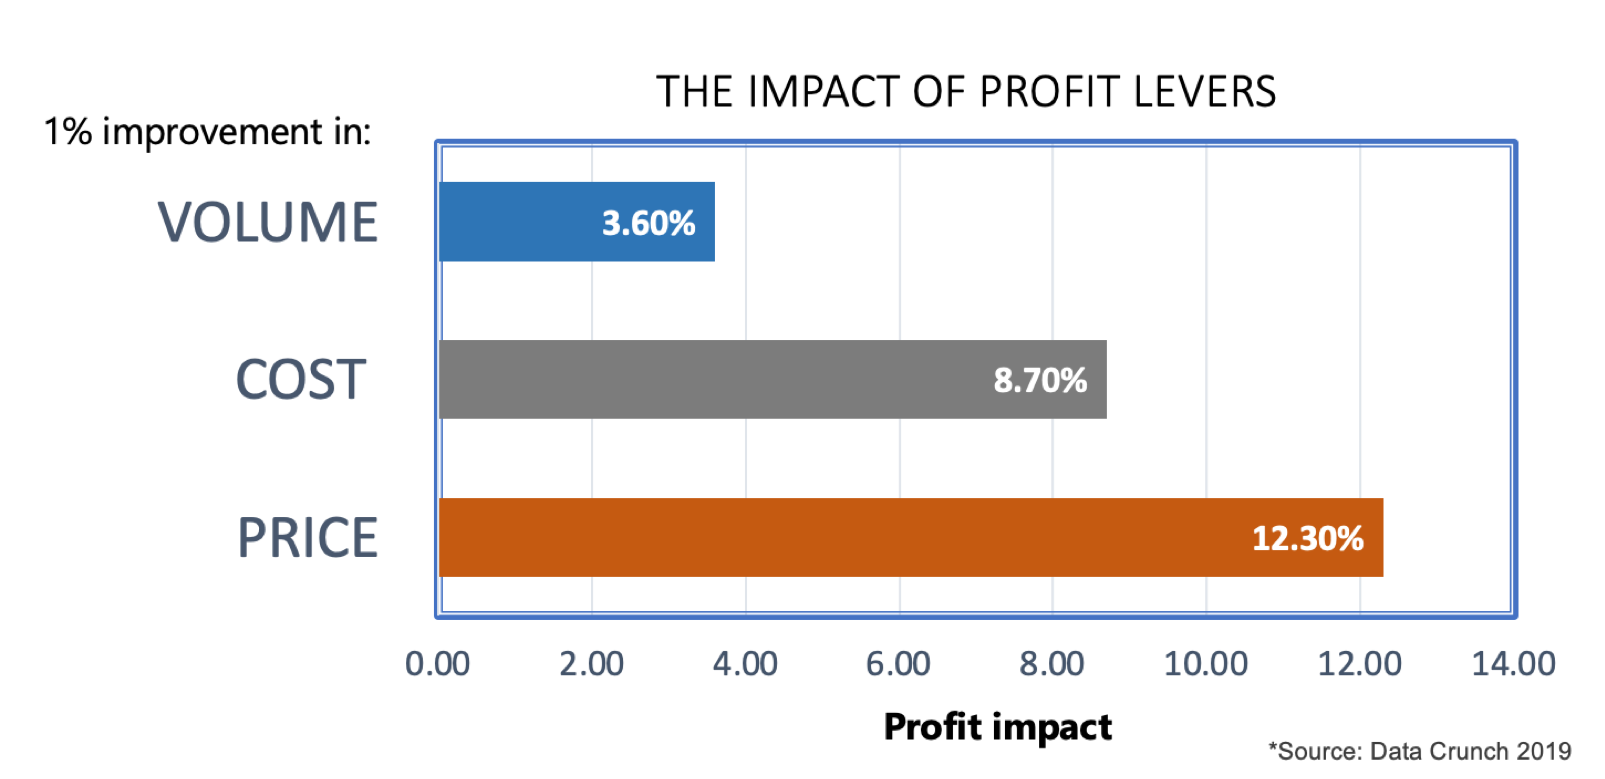 The Impact of Profit Levers